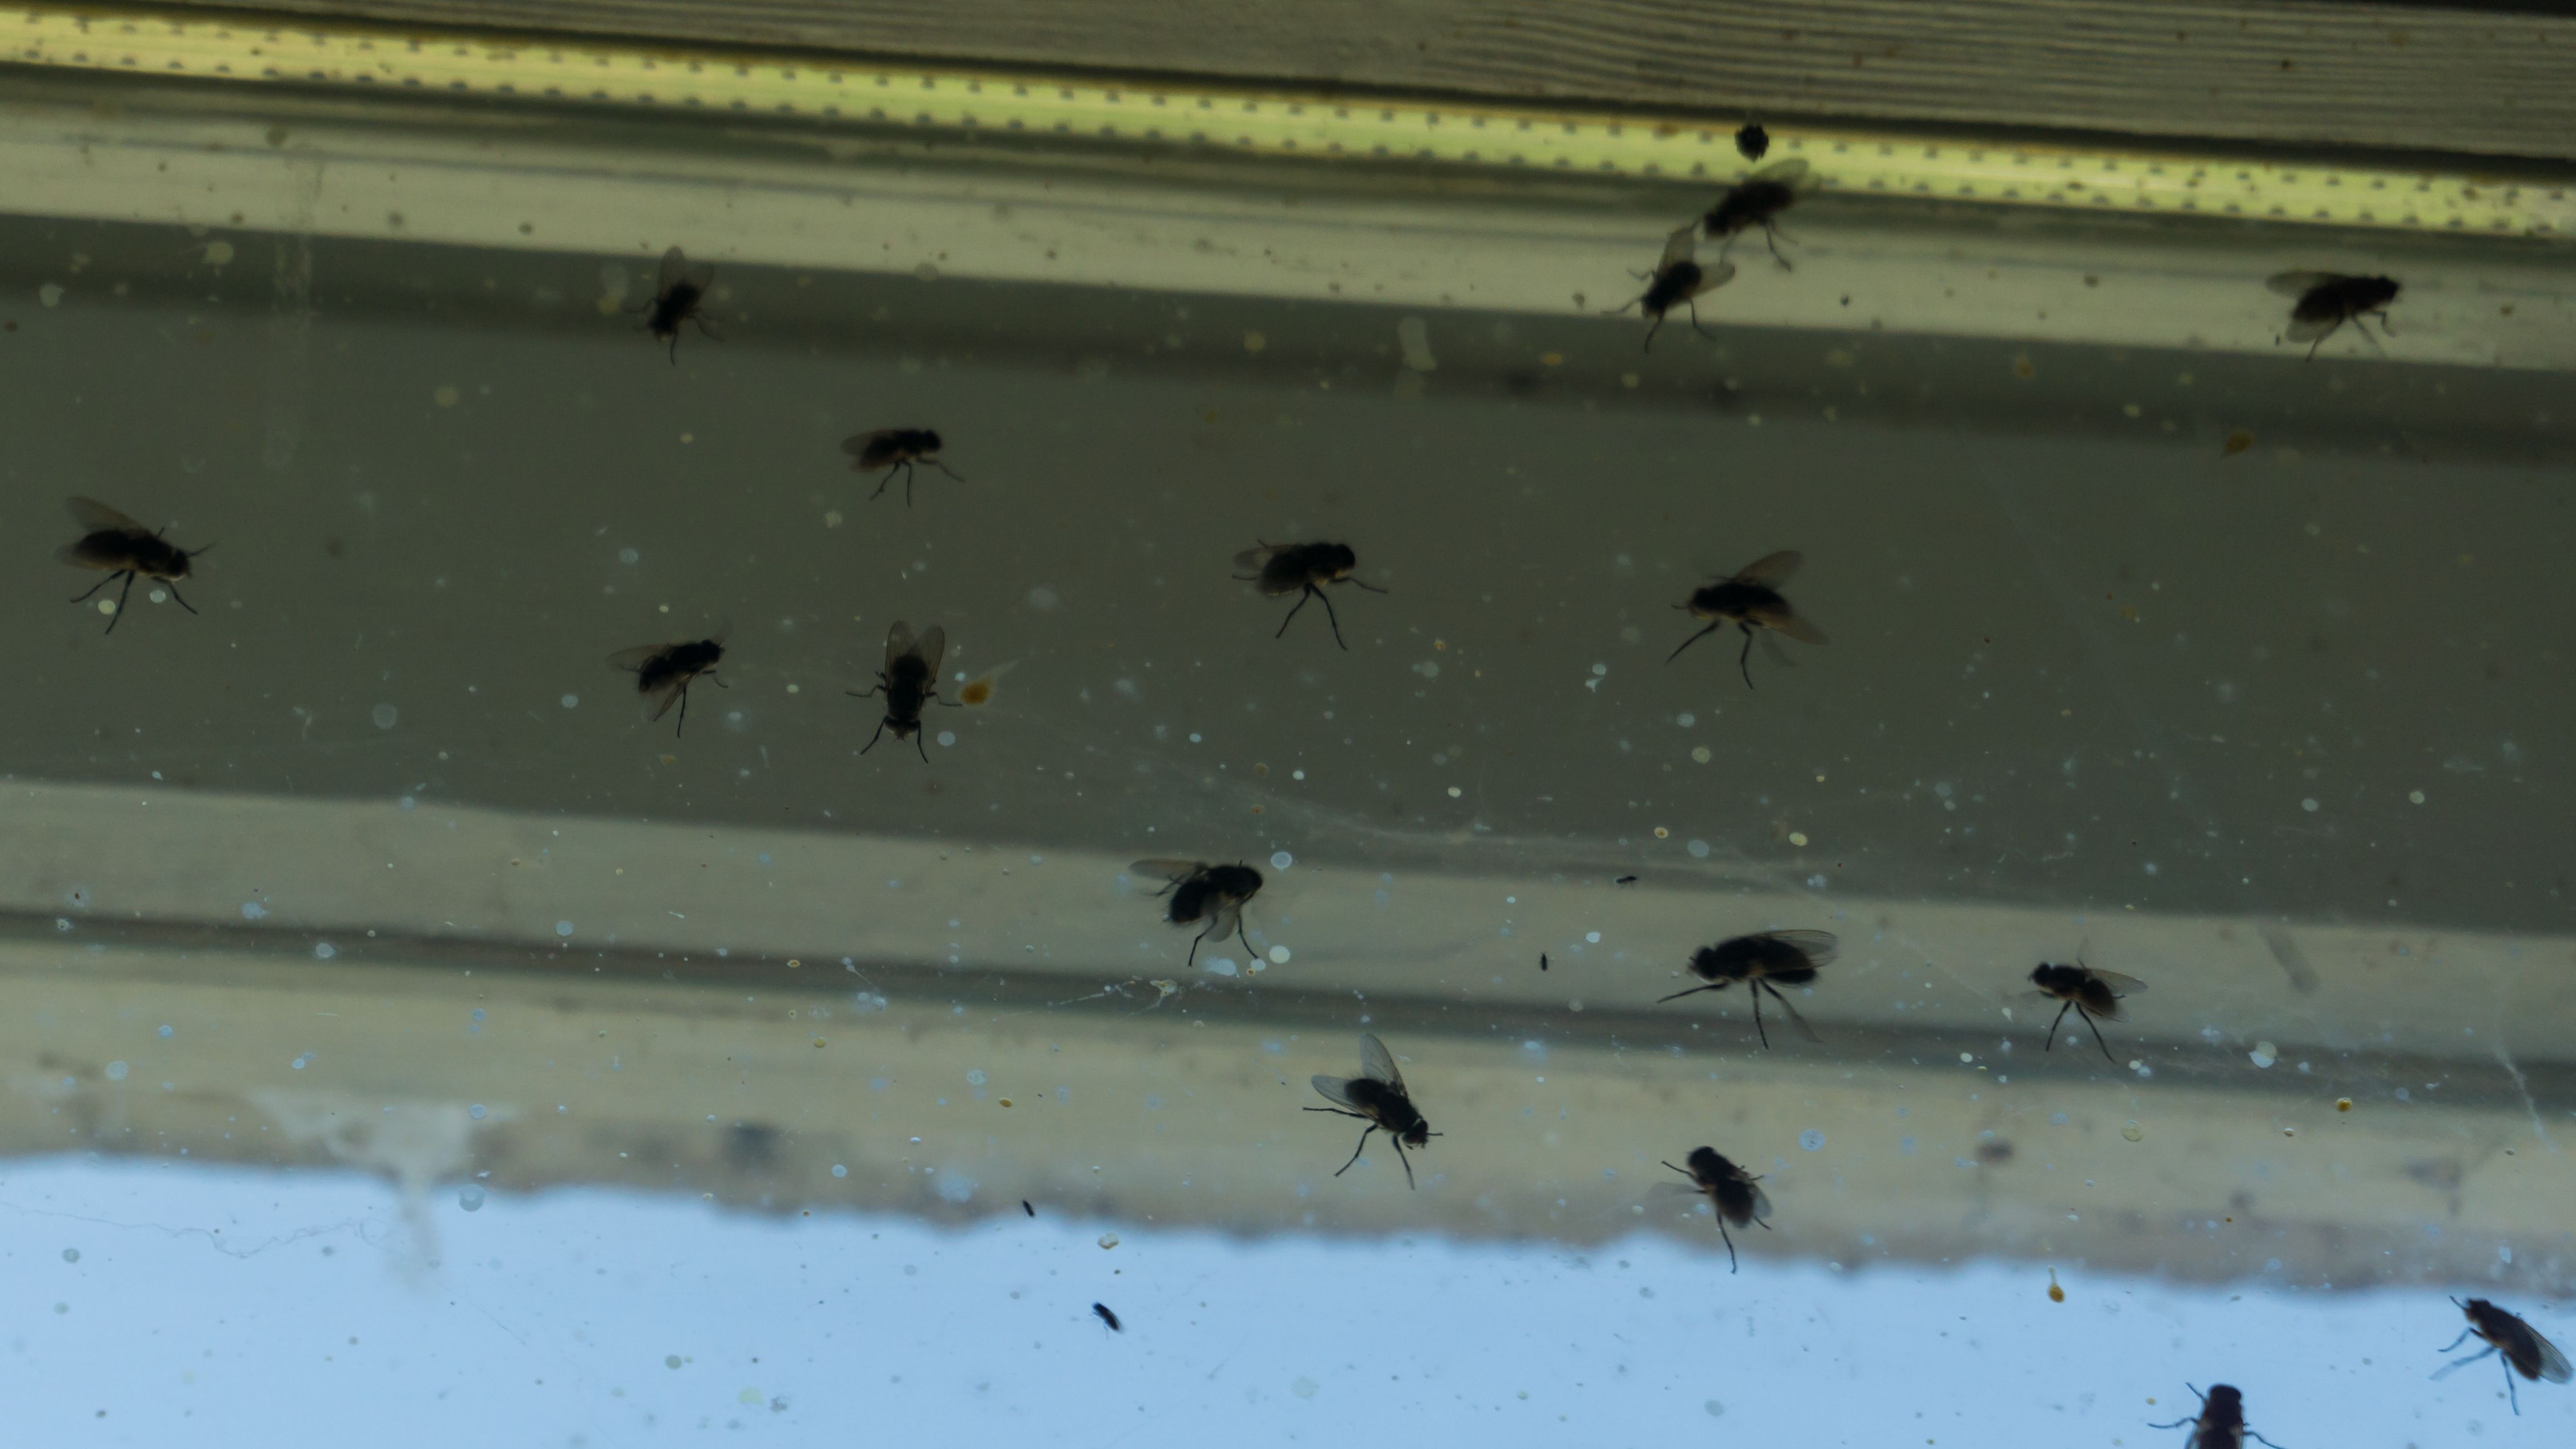 https://hips.hearstapps.com/hmg-prod/images/dirty-window-covered-with-flies-and-other-insects-royalty-free-image-1594592358.jpg?crop=1xw:0.74994xh;center,top